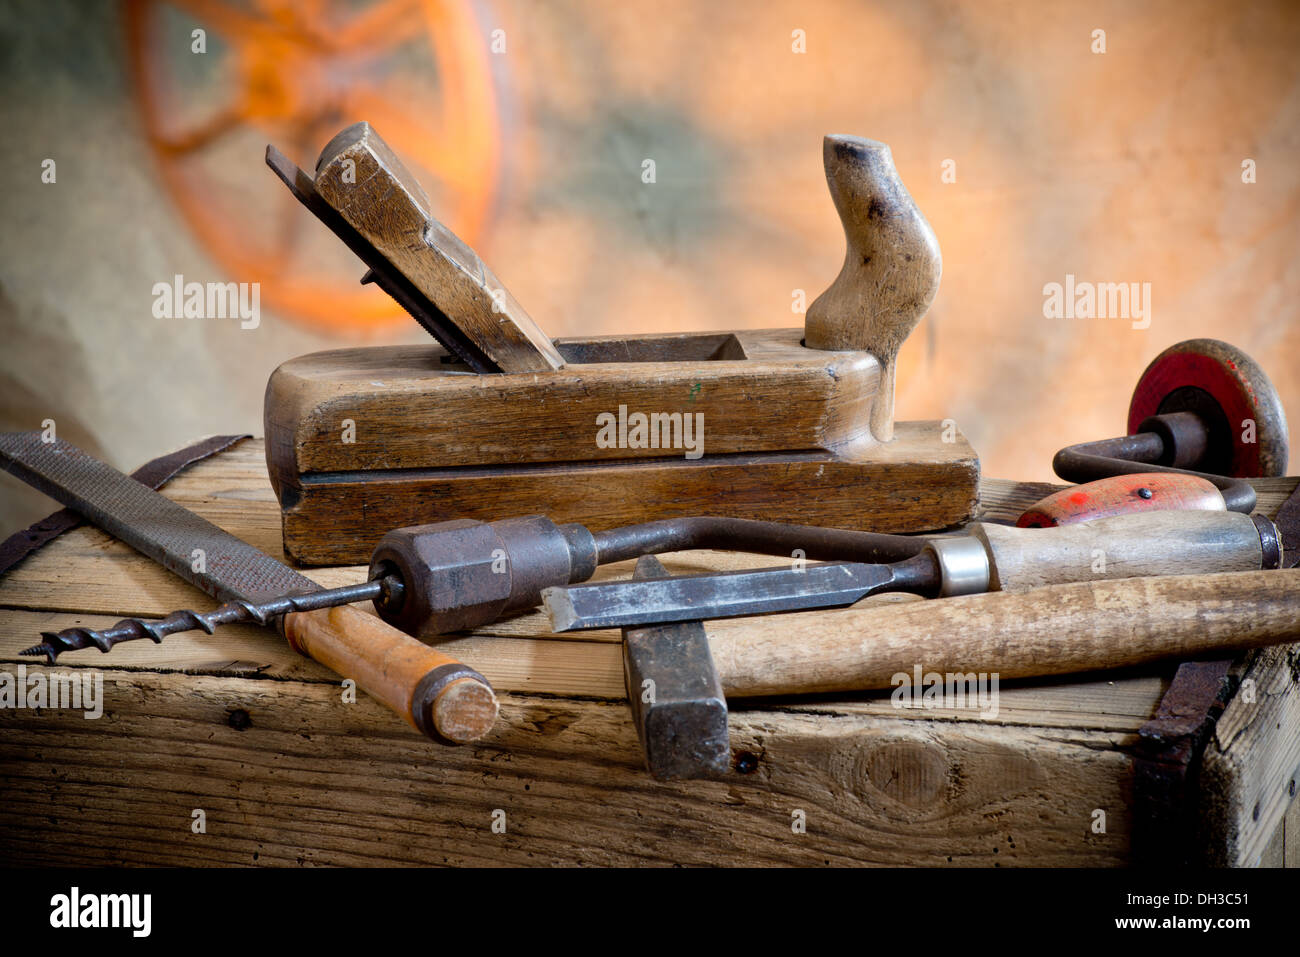 still life with old hammer and carpentry tools Stock Photo